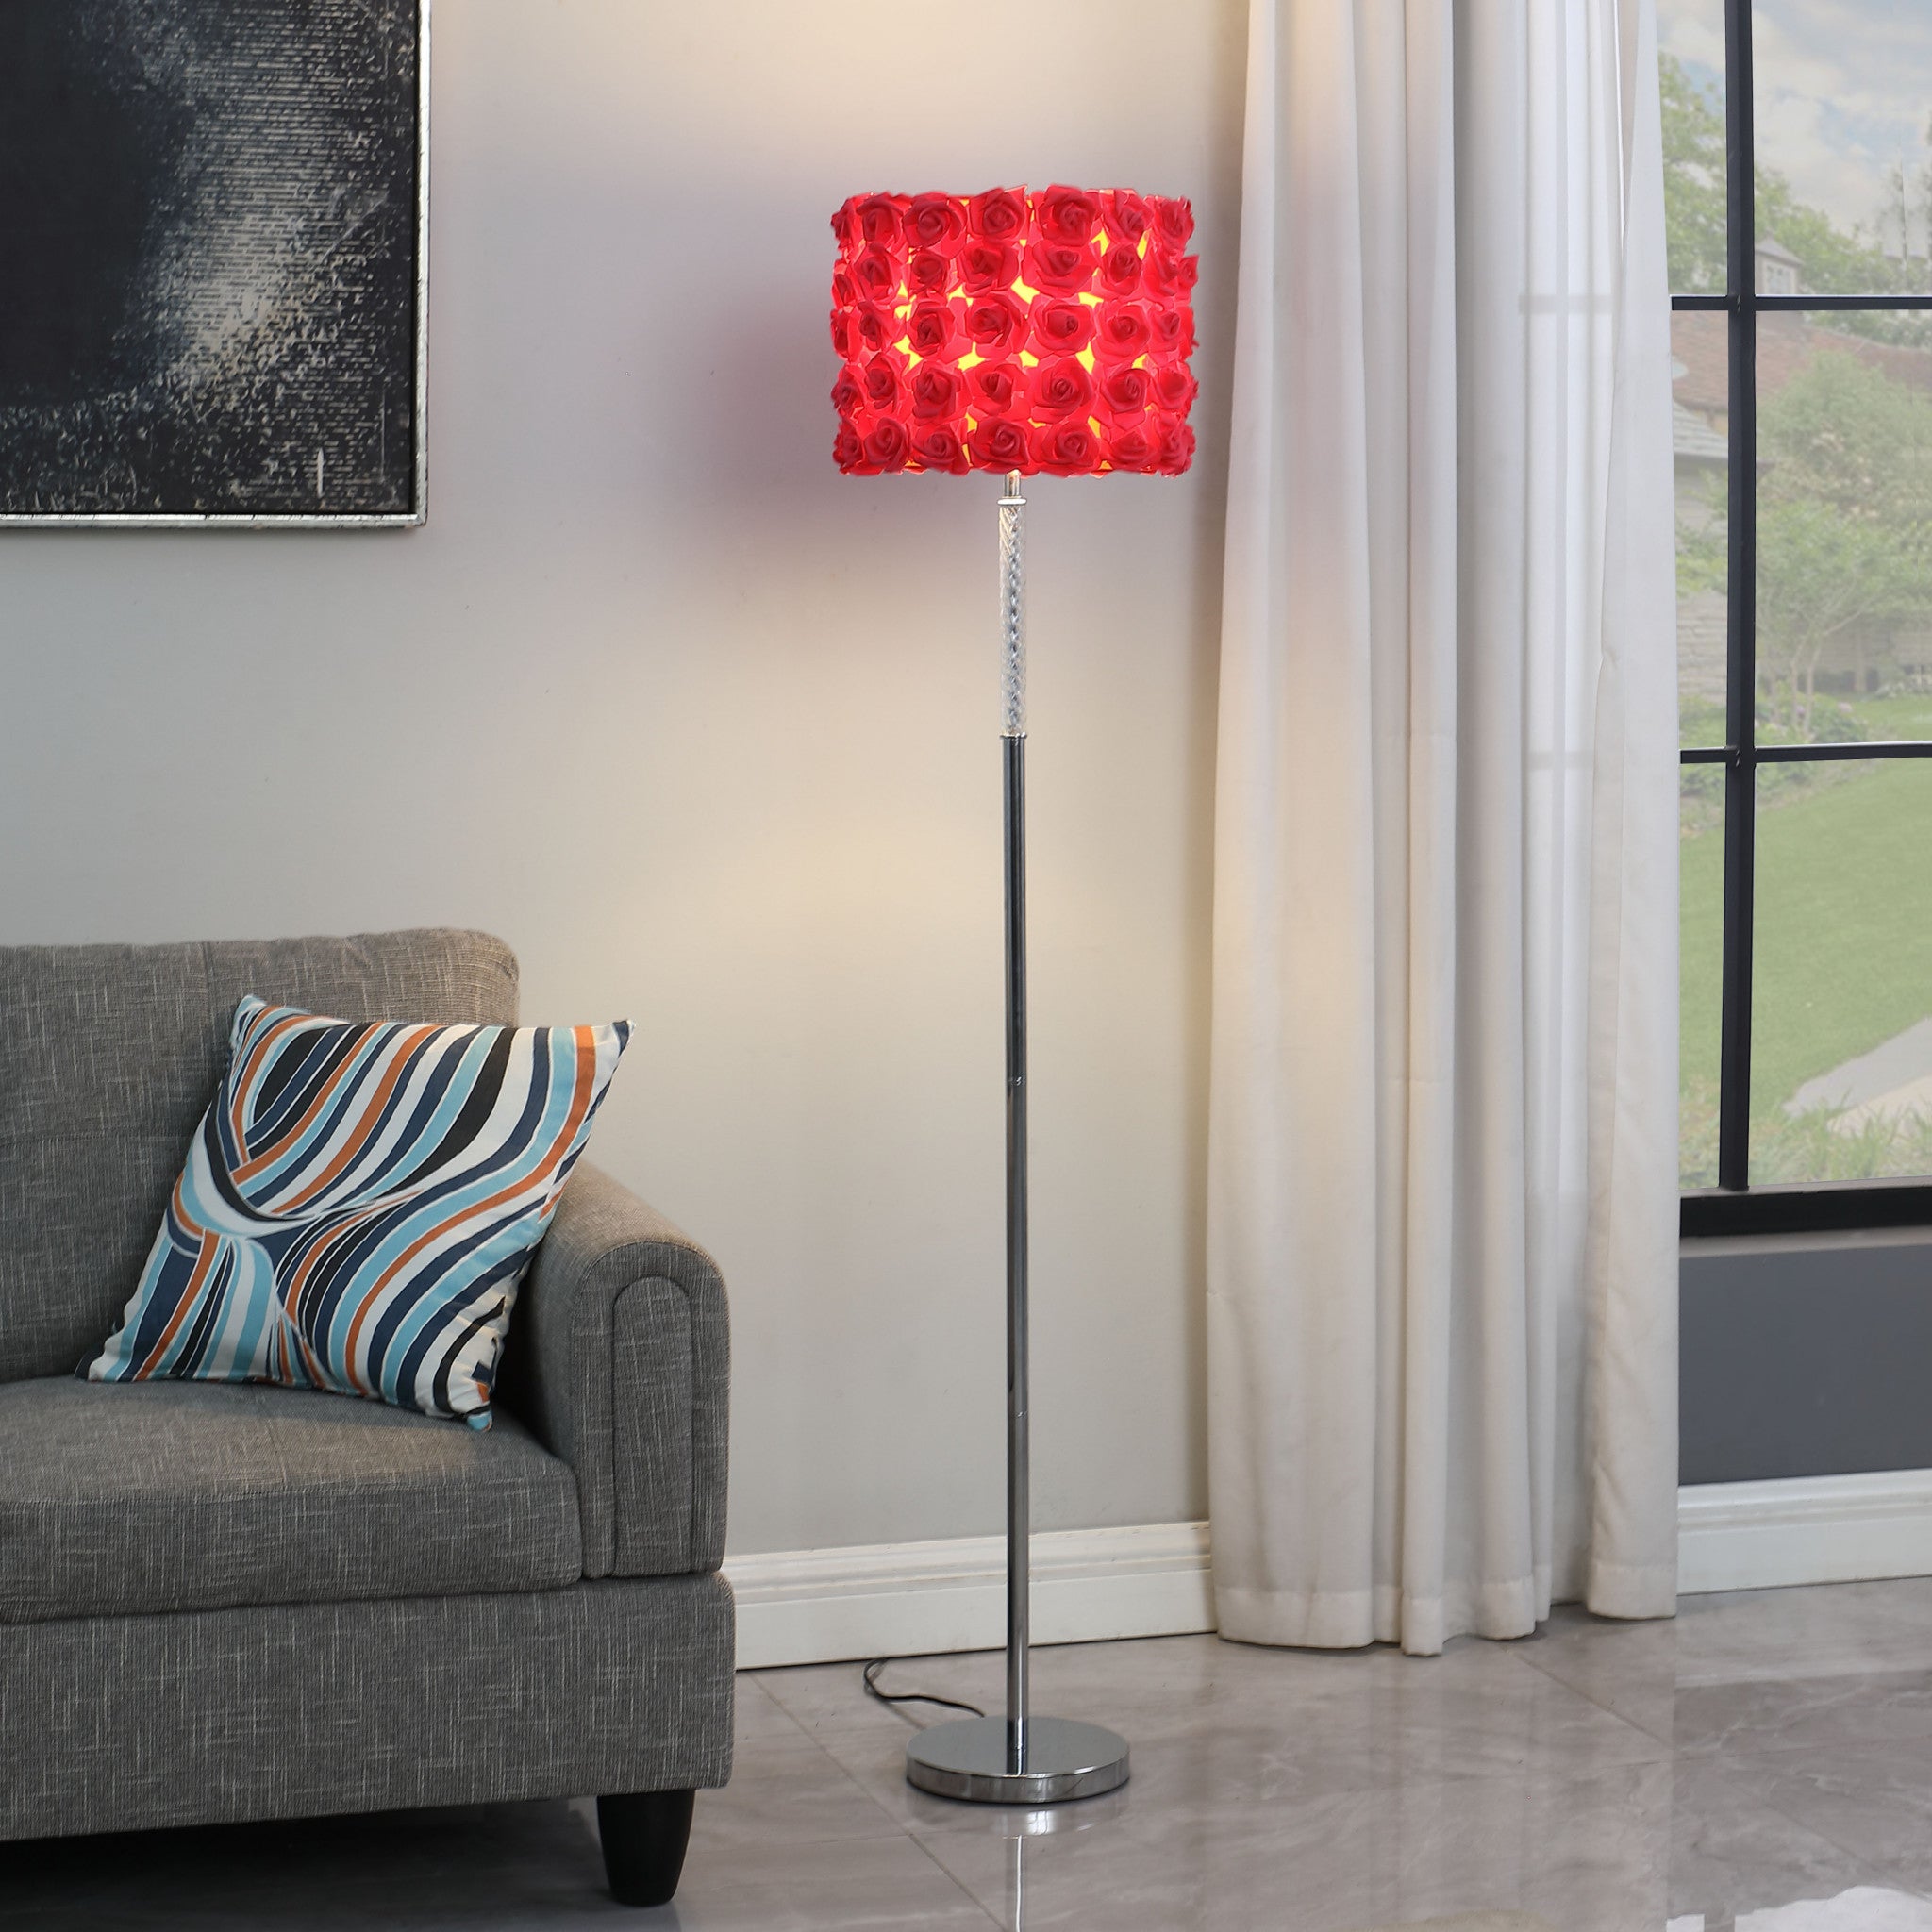 63" Steel and Acrylic Floor Lamp With Red Flowers Fabric Drum Shade